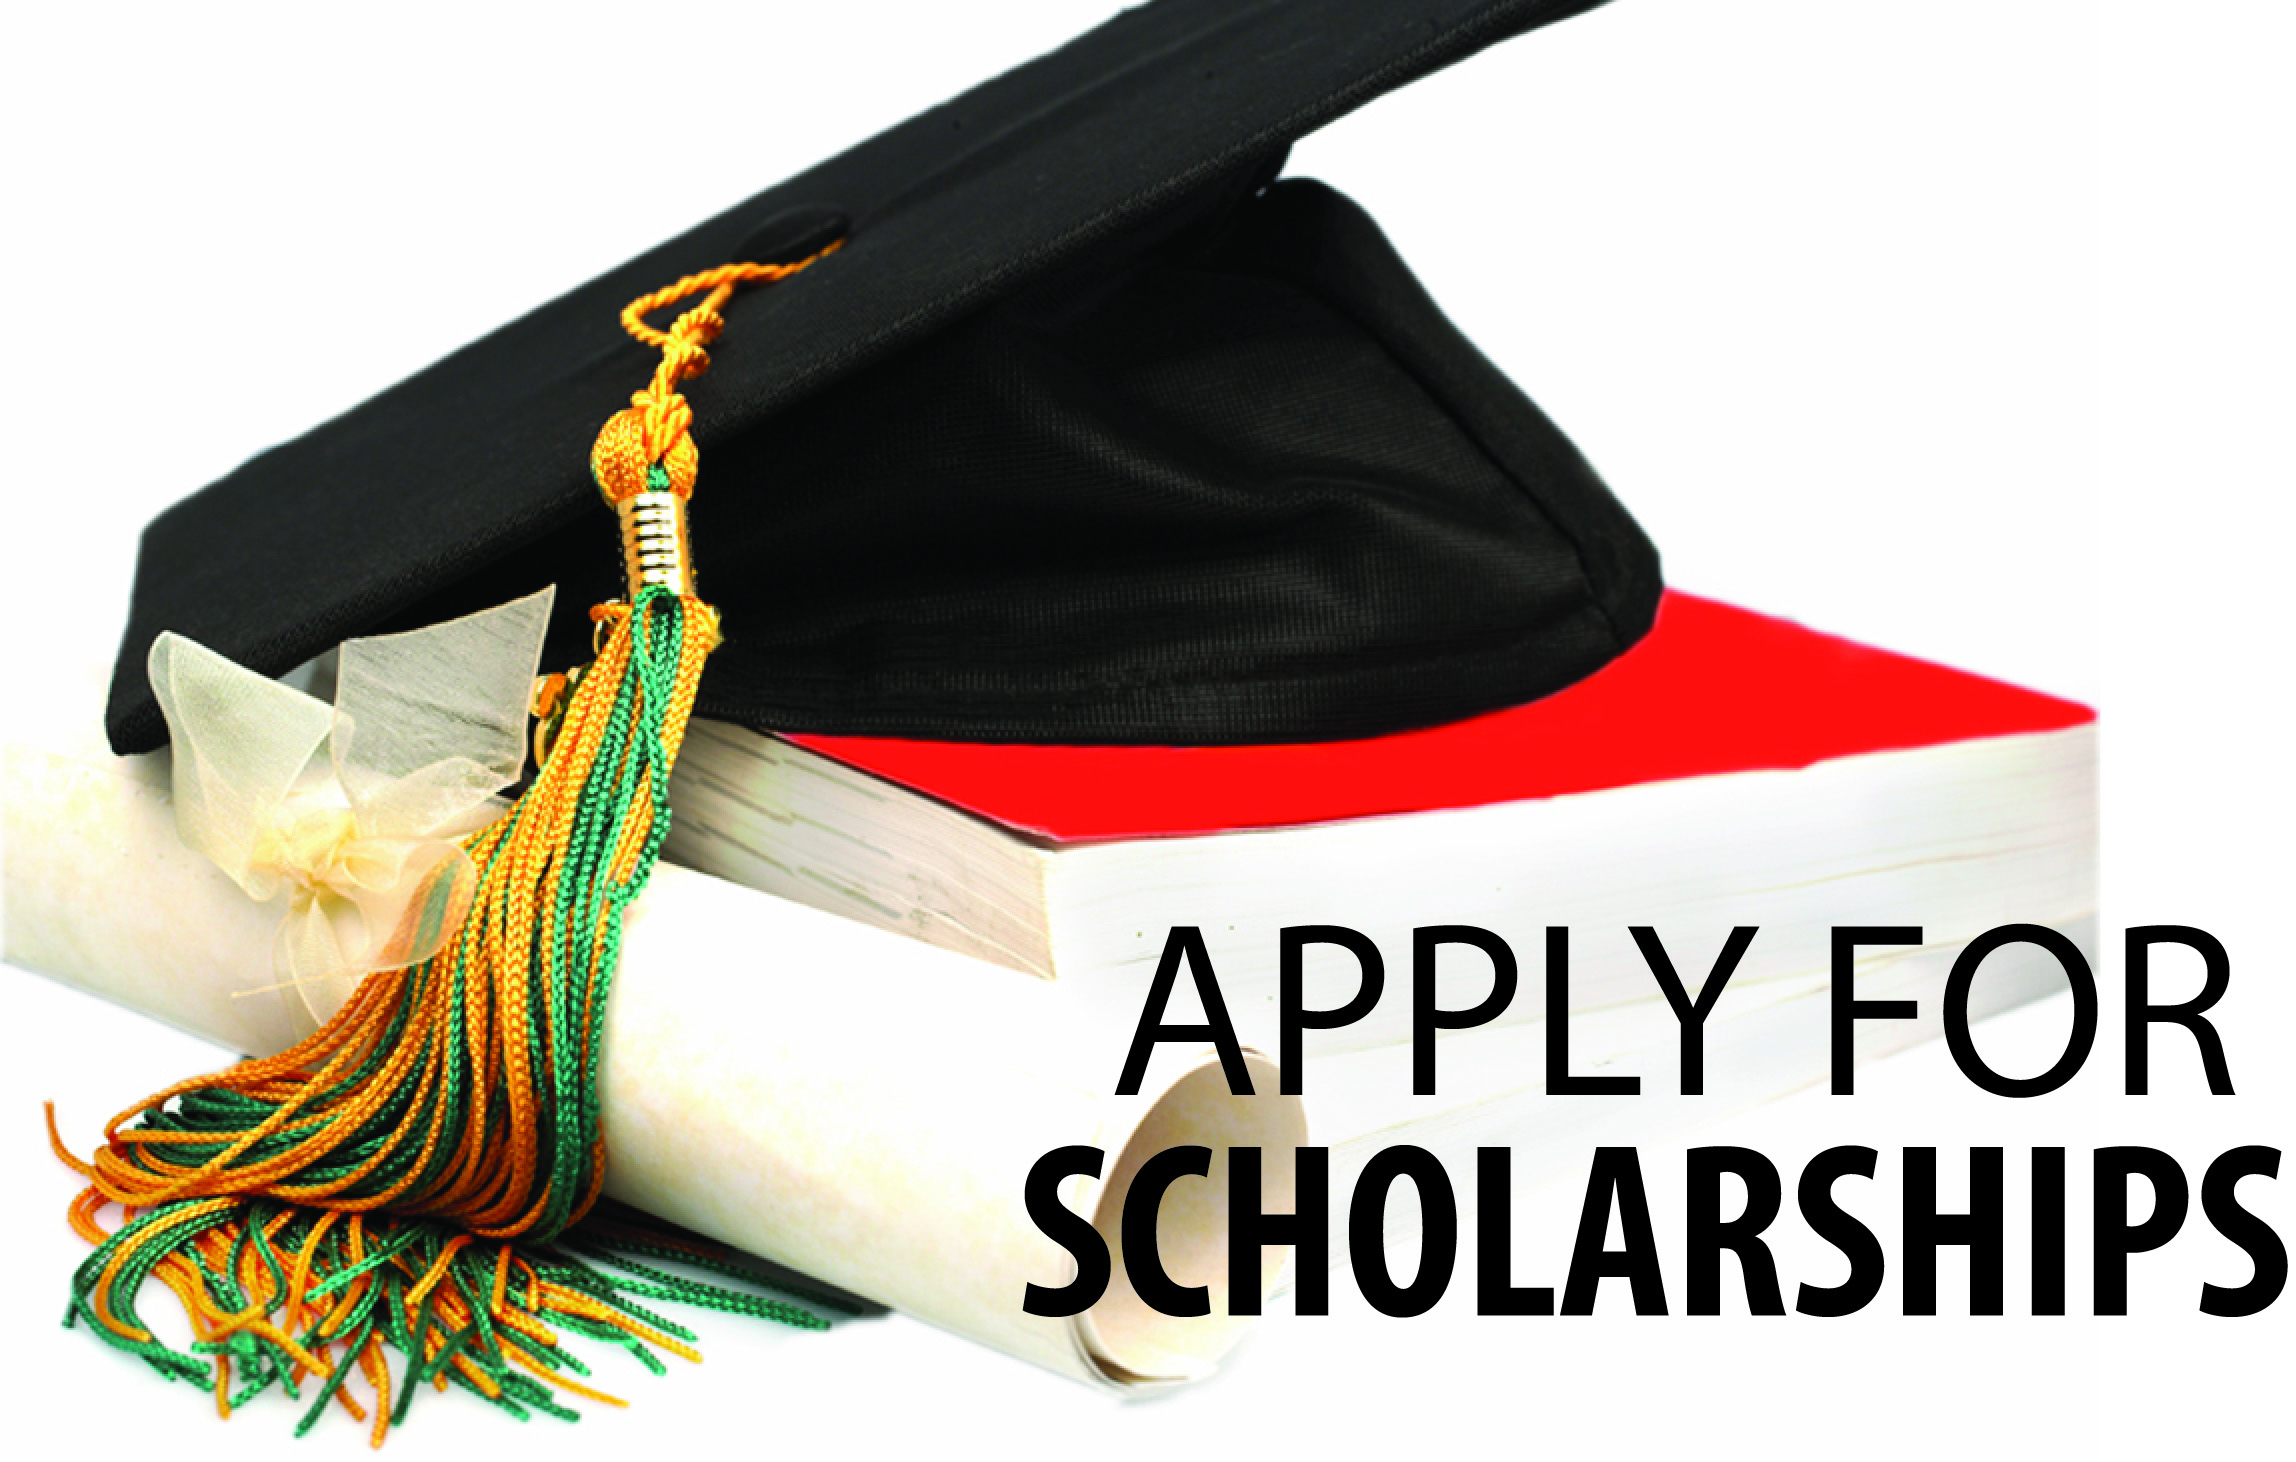 International Scholarships: Want To Study In USA?